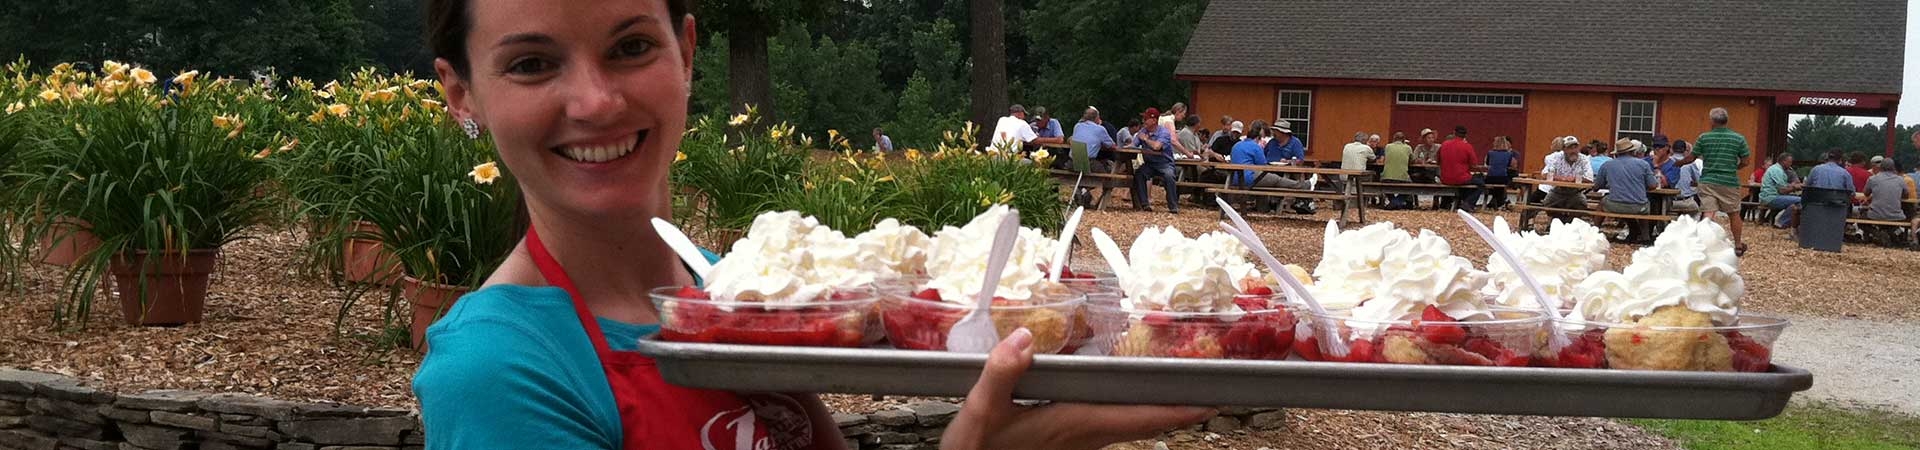 Desserts to make with fresh strawberries from Parlee Farms 